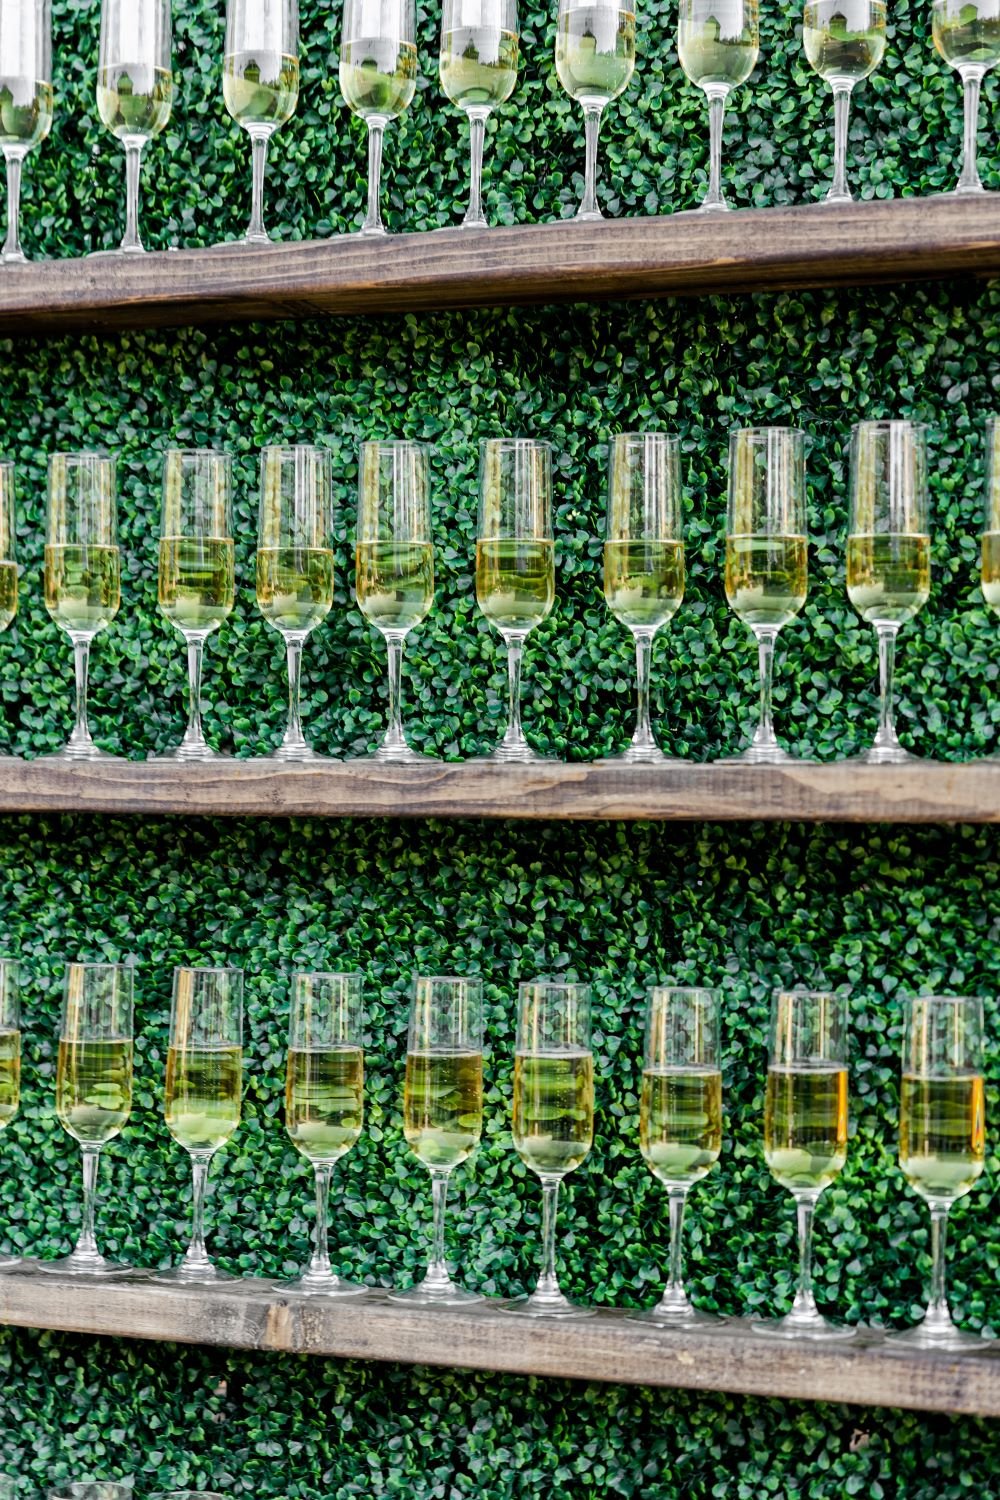 How to nail your wedding rehearsal dinner toast, classic wooden shelves with greenery in the background & champagne glasses on them, let's get rehearsed